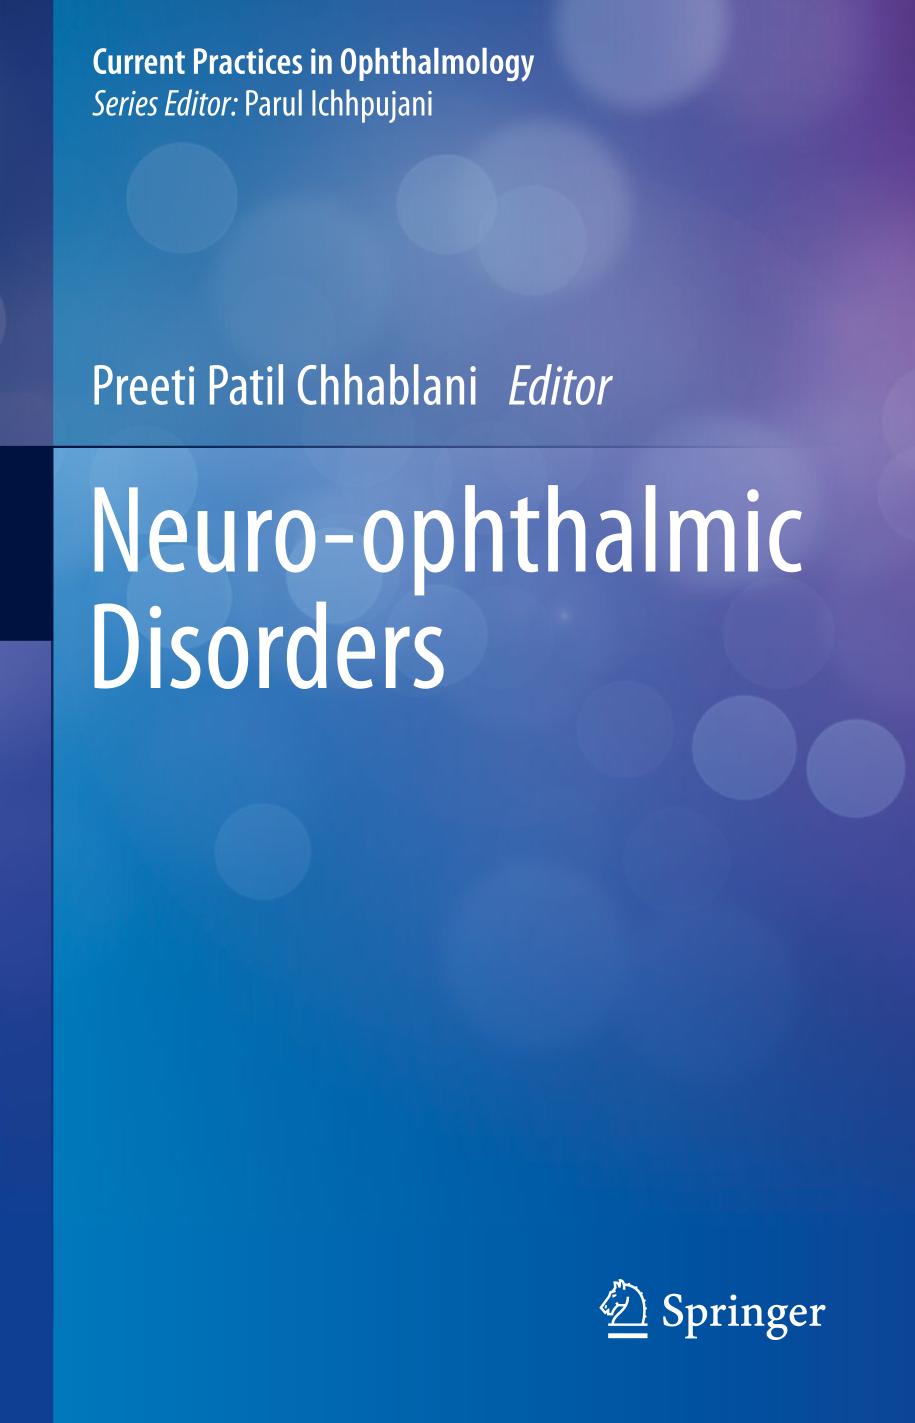 Neuro-ophthalmic disorders